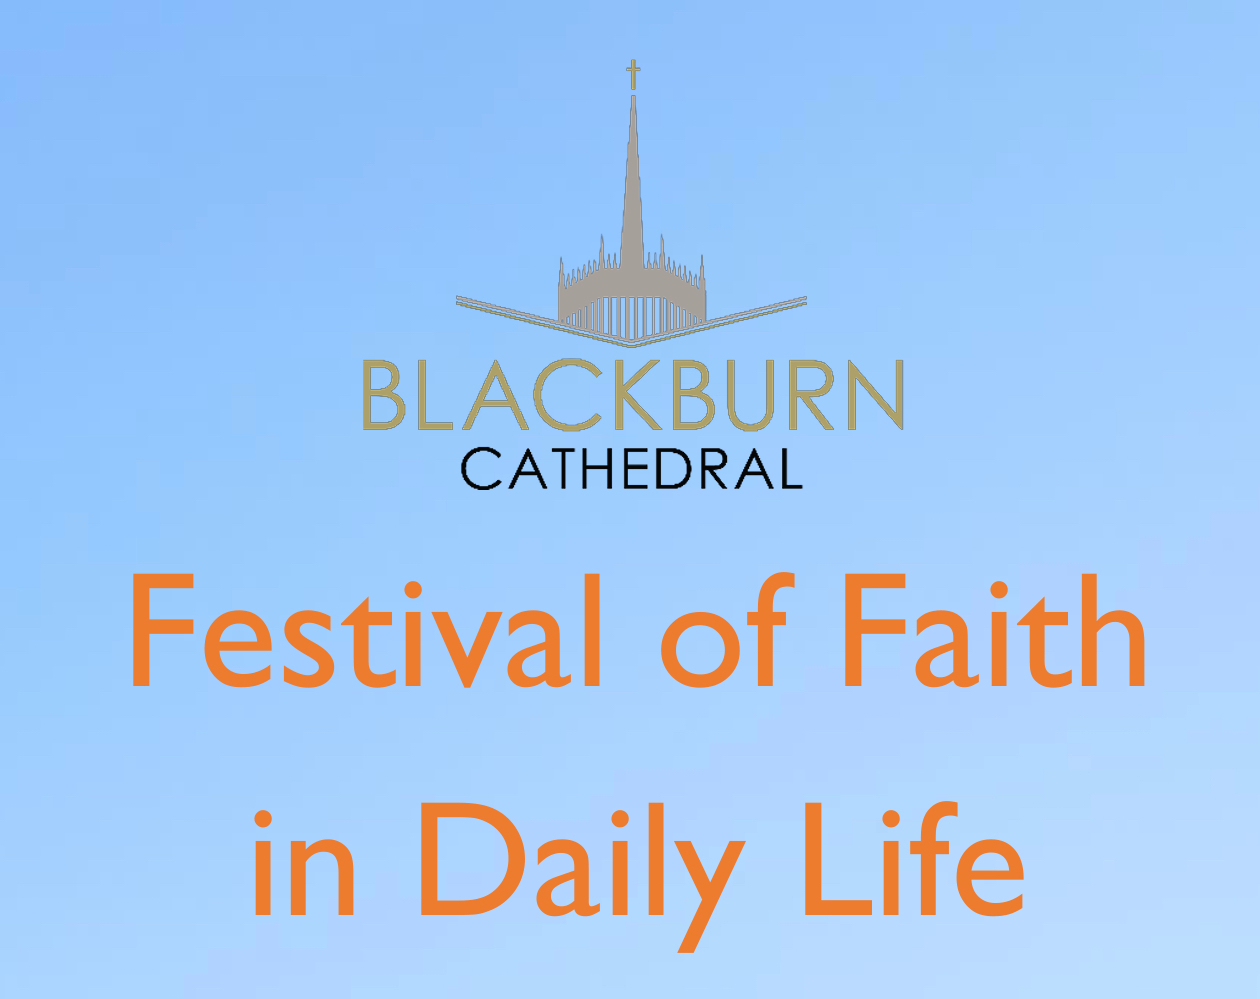 Festival of Faith in Daily Life at Blackburn Cathedral